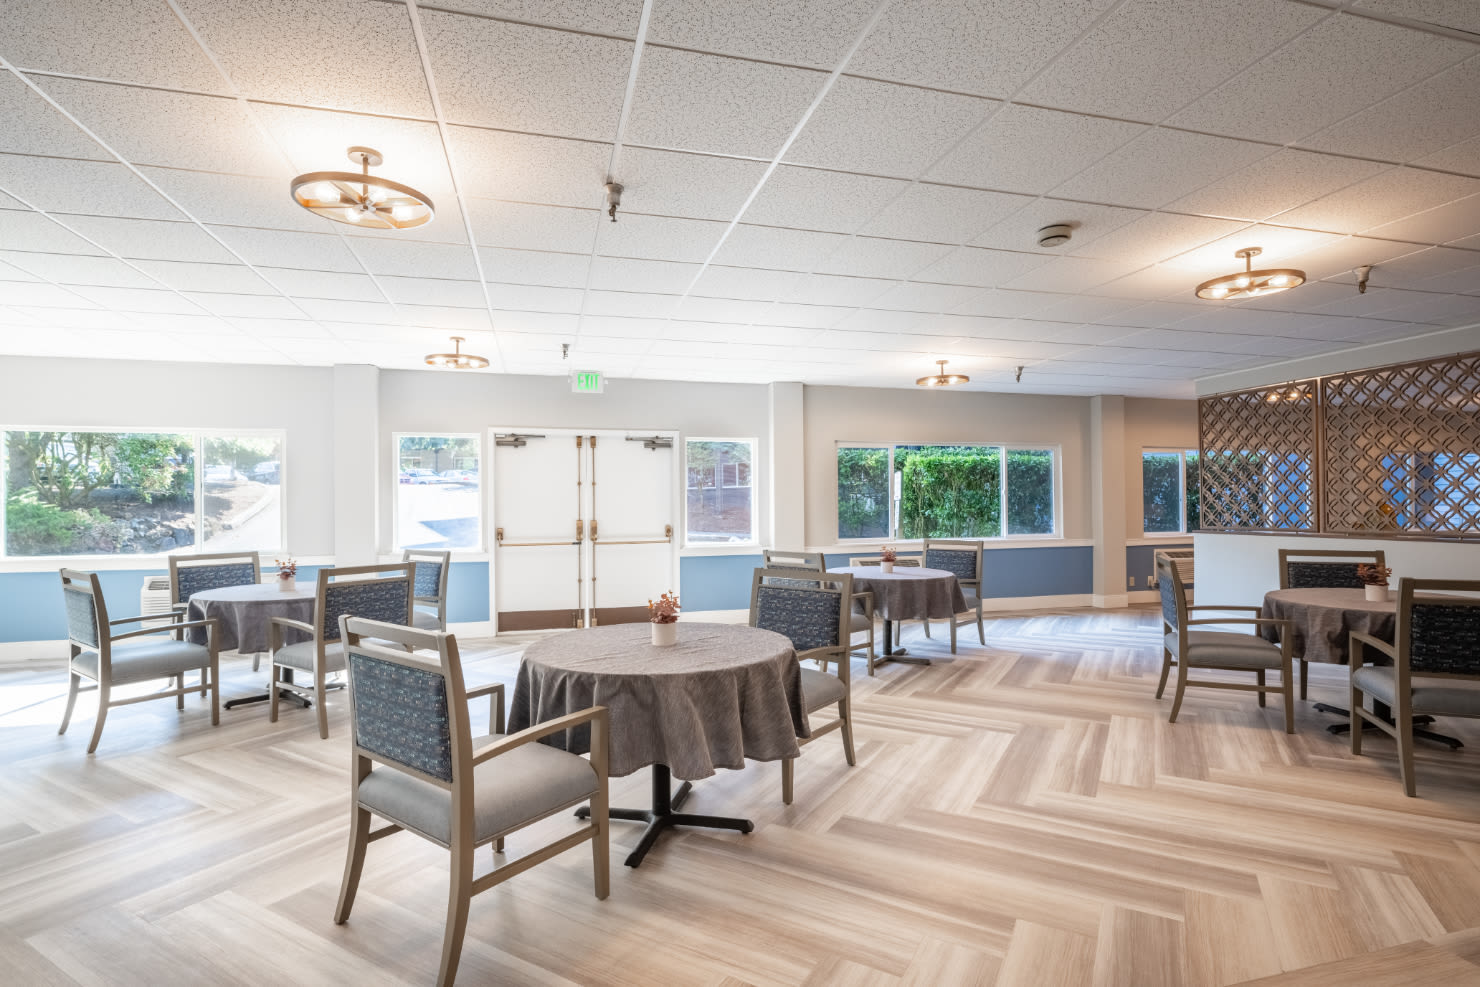 A peaceful community dining room area at The Village Senior Living in Tacoma, Washington